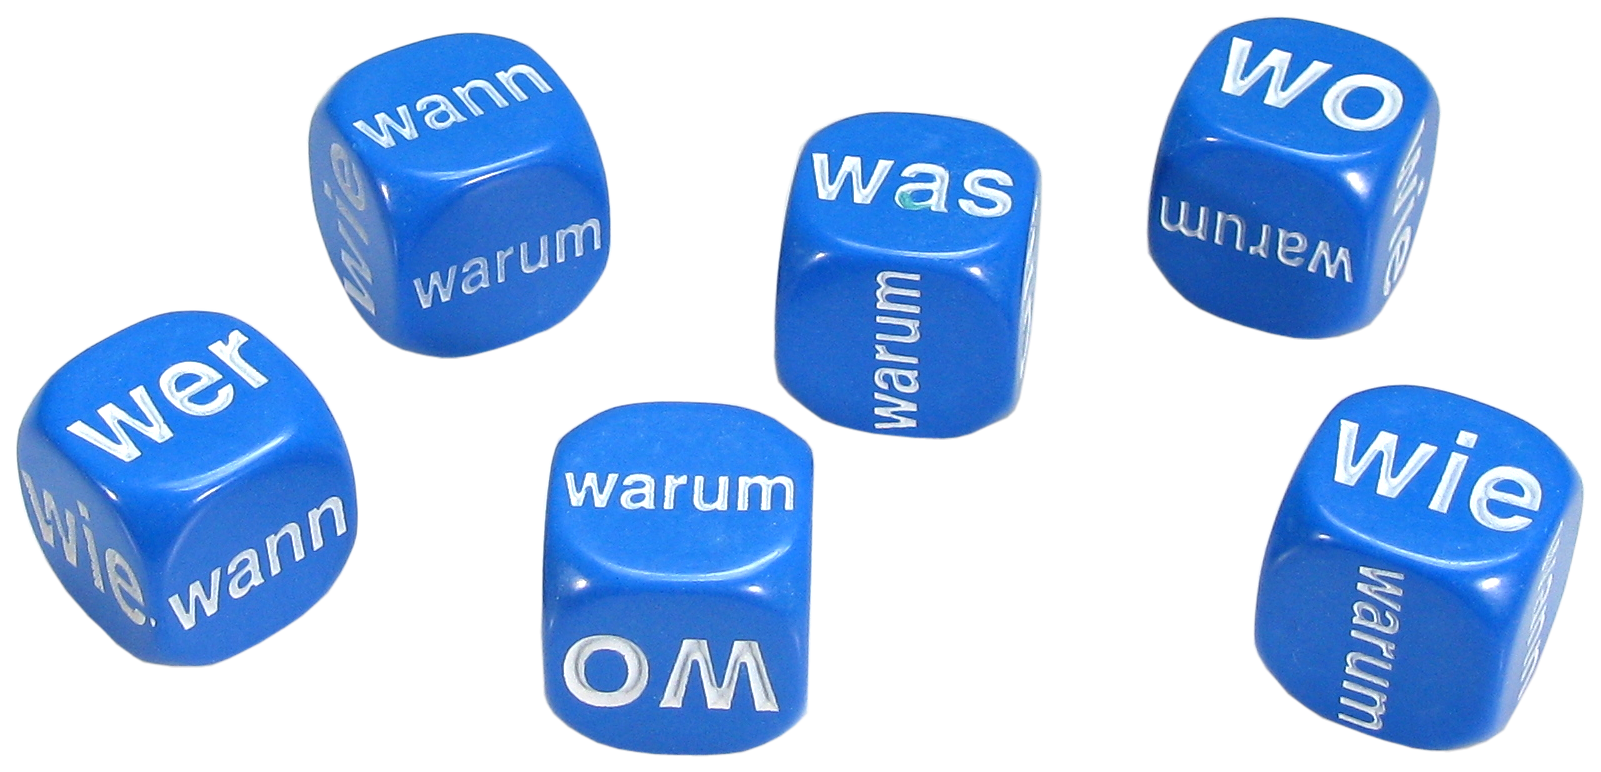 Games: Set of 6 German Question Dice